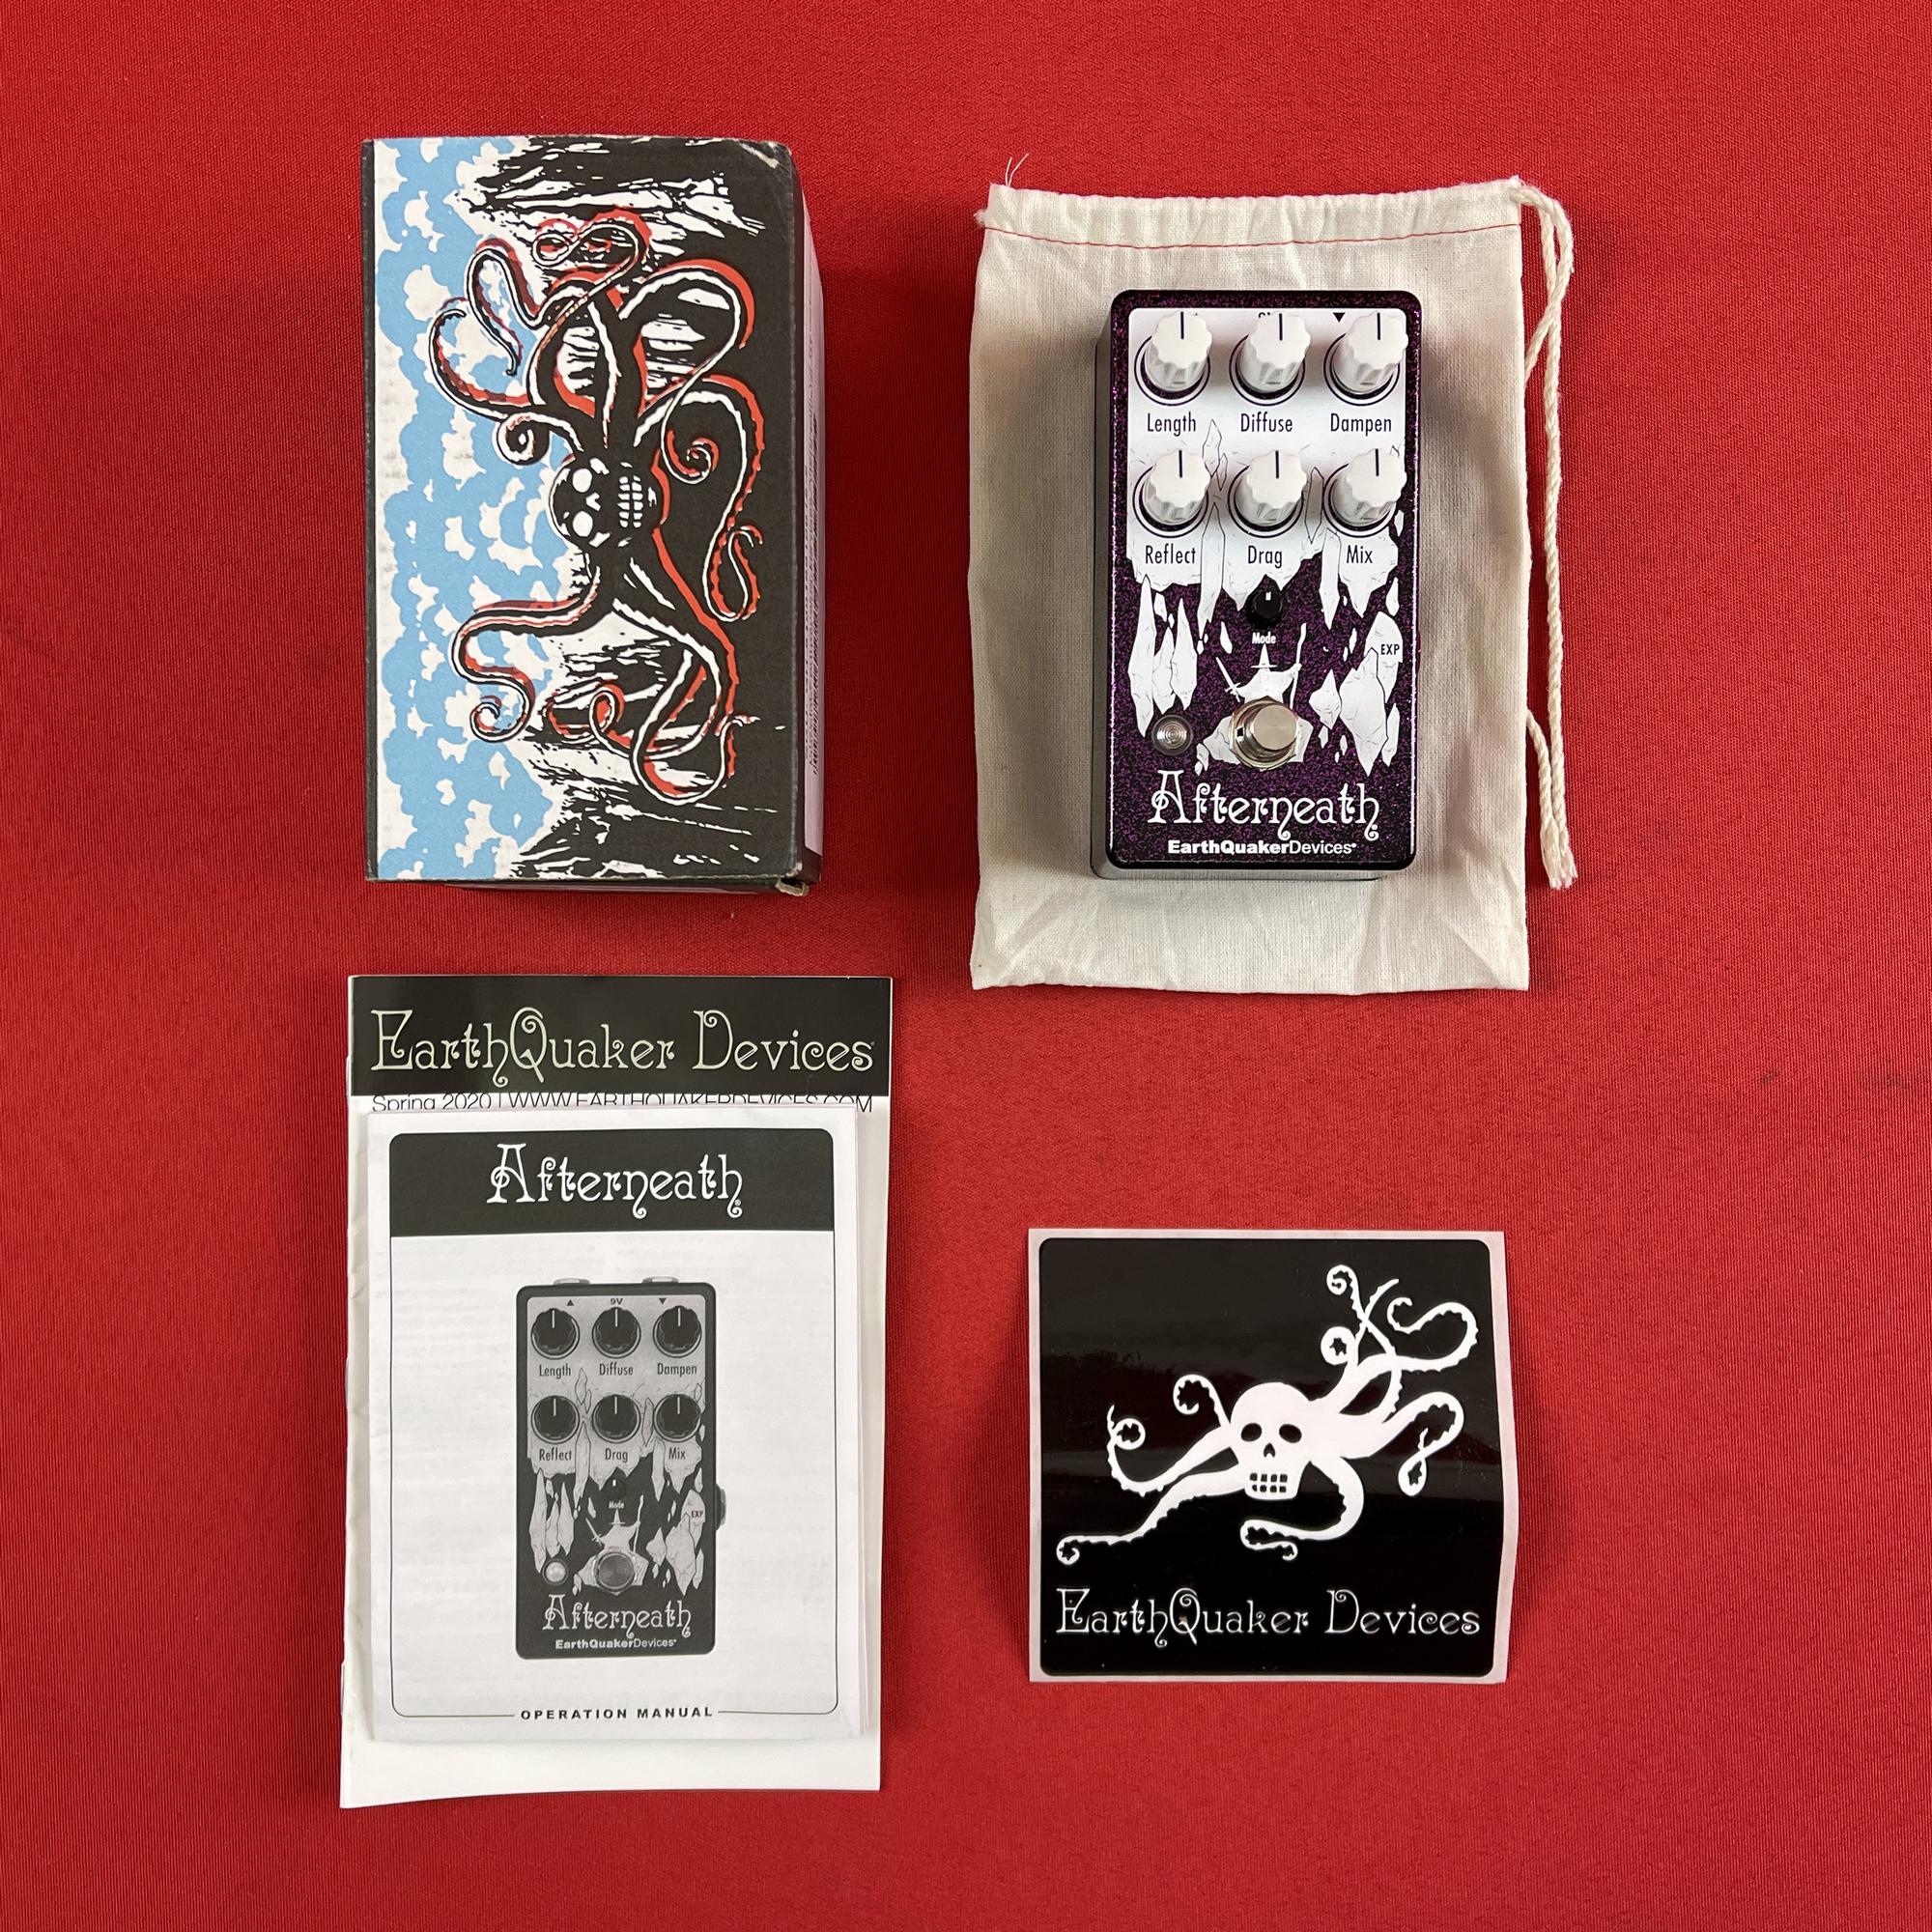 [USED] EarthQuaker Devices Afterneath V2 Reverberation Machine, Purple Sparkle (Gear Hero Exclusive)